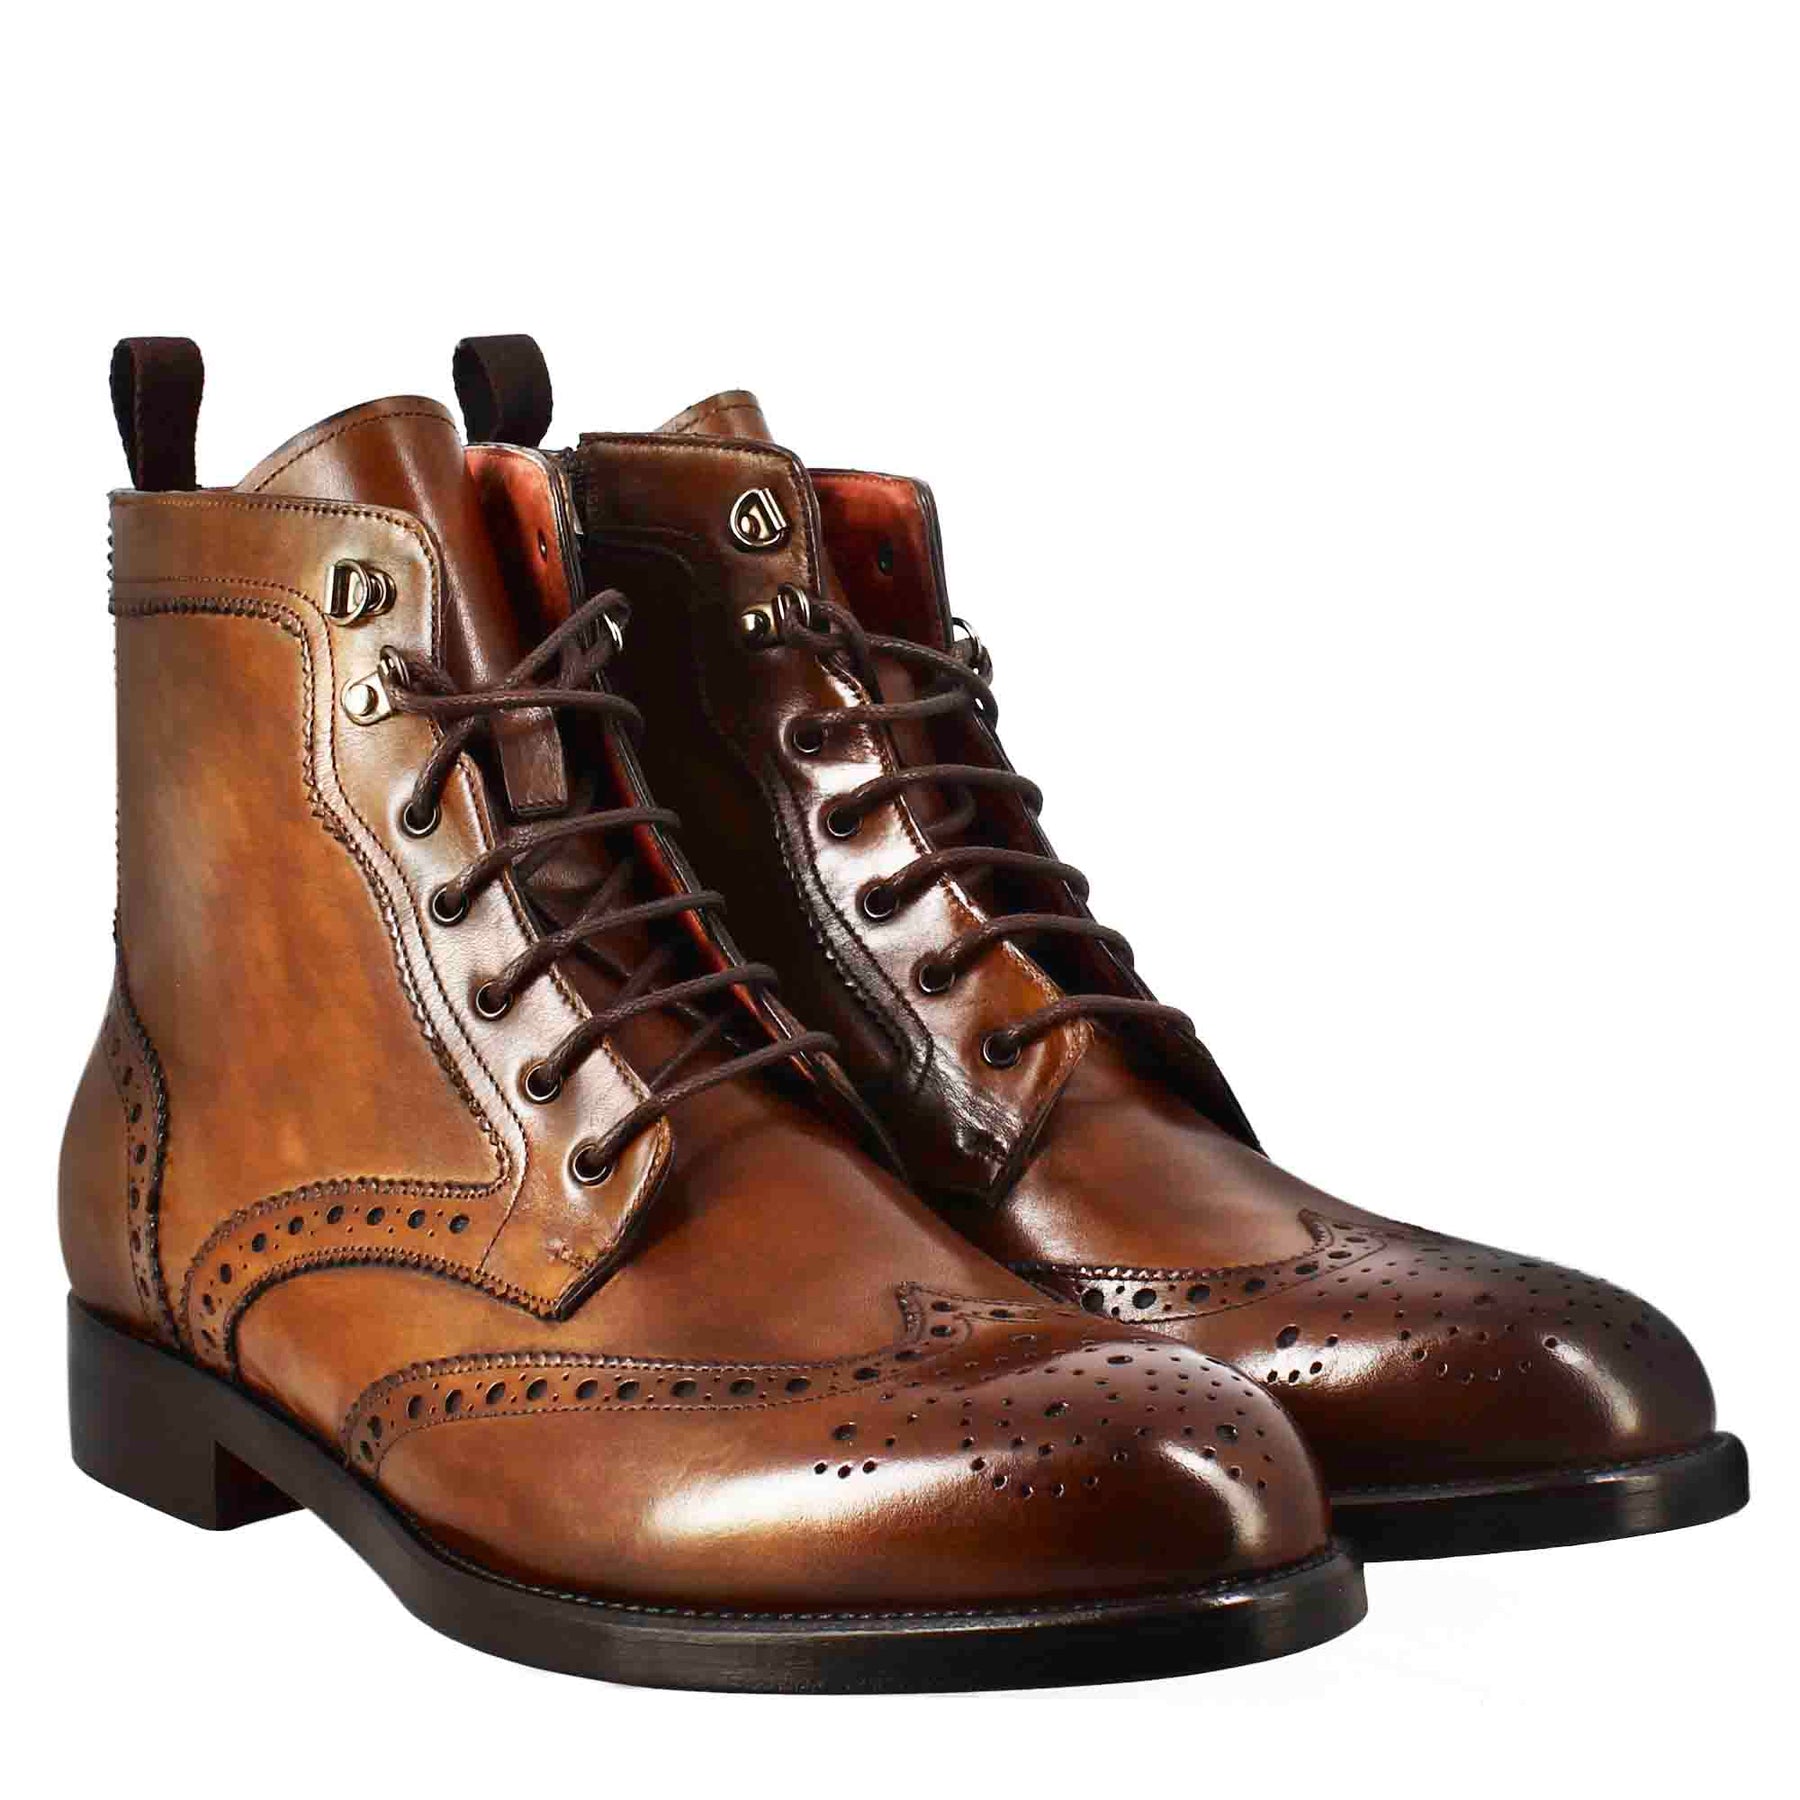 Men's high amphibious brogue boot in tan leather